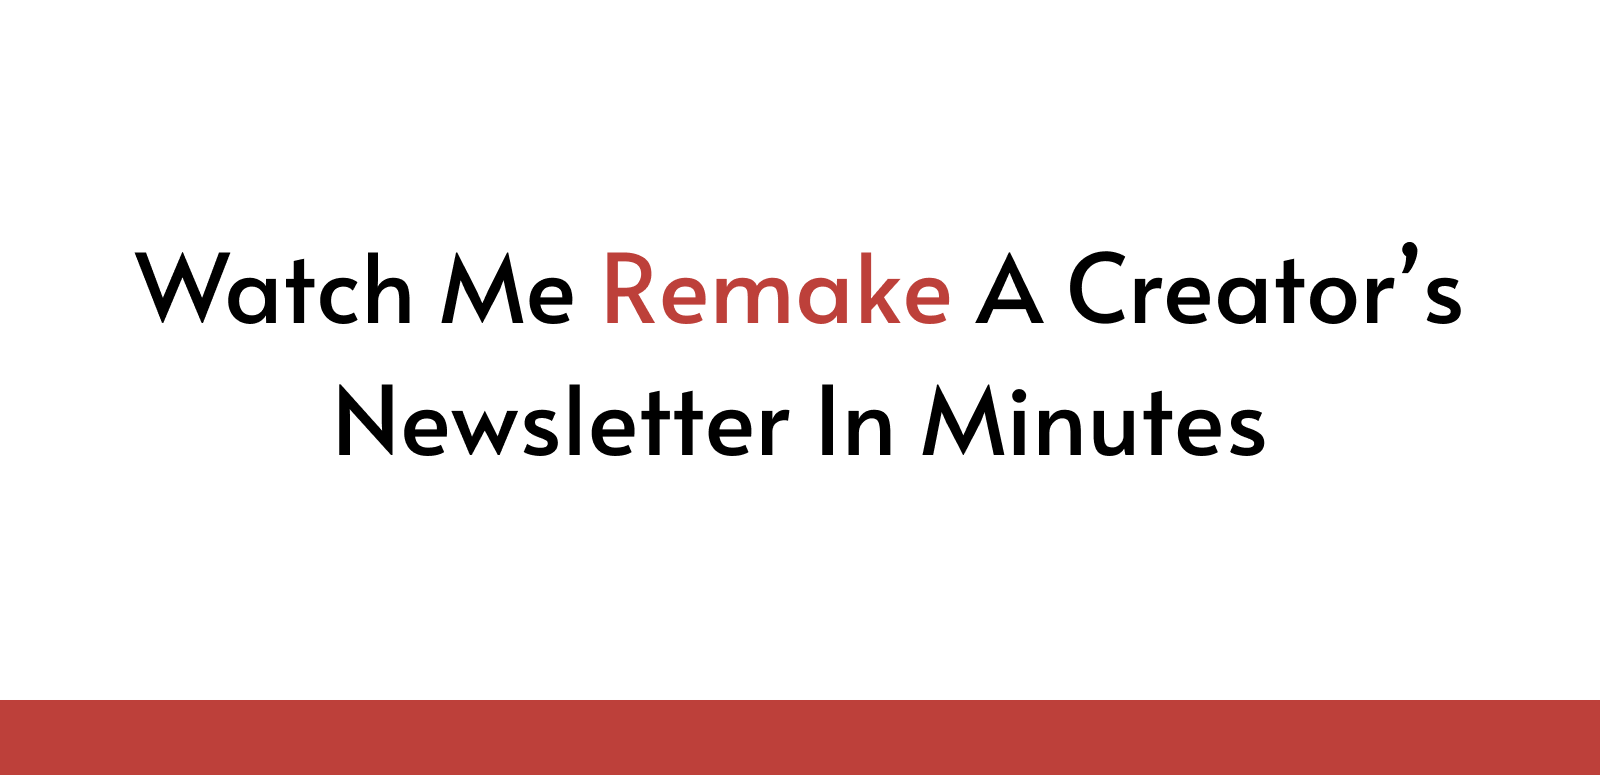 Watch Me Reake A Creator's Newsletter In Minutes